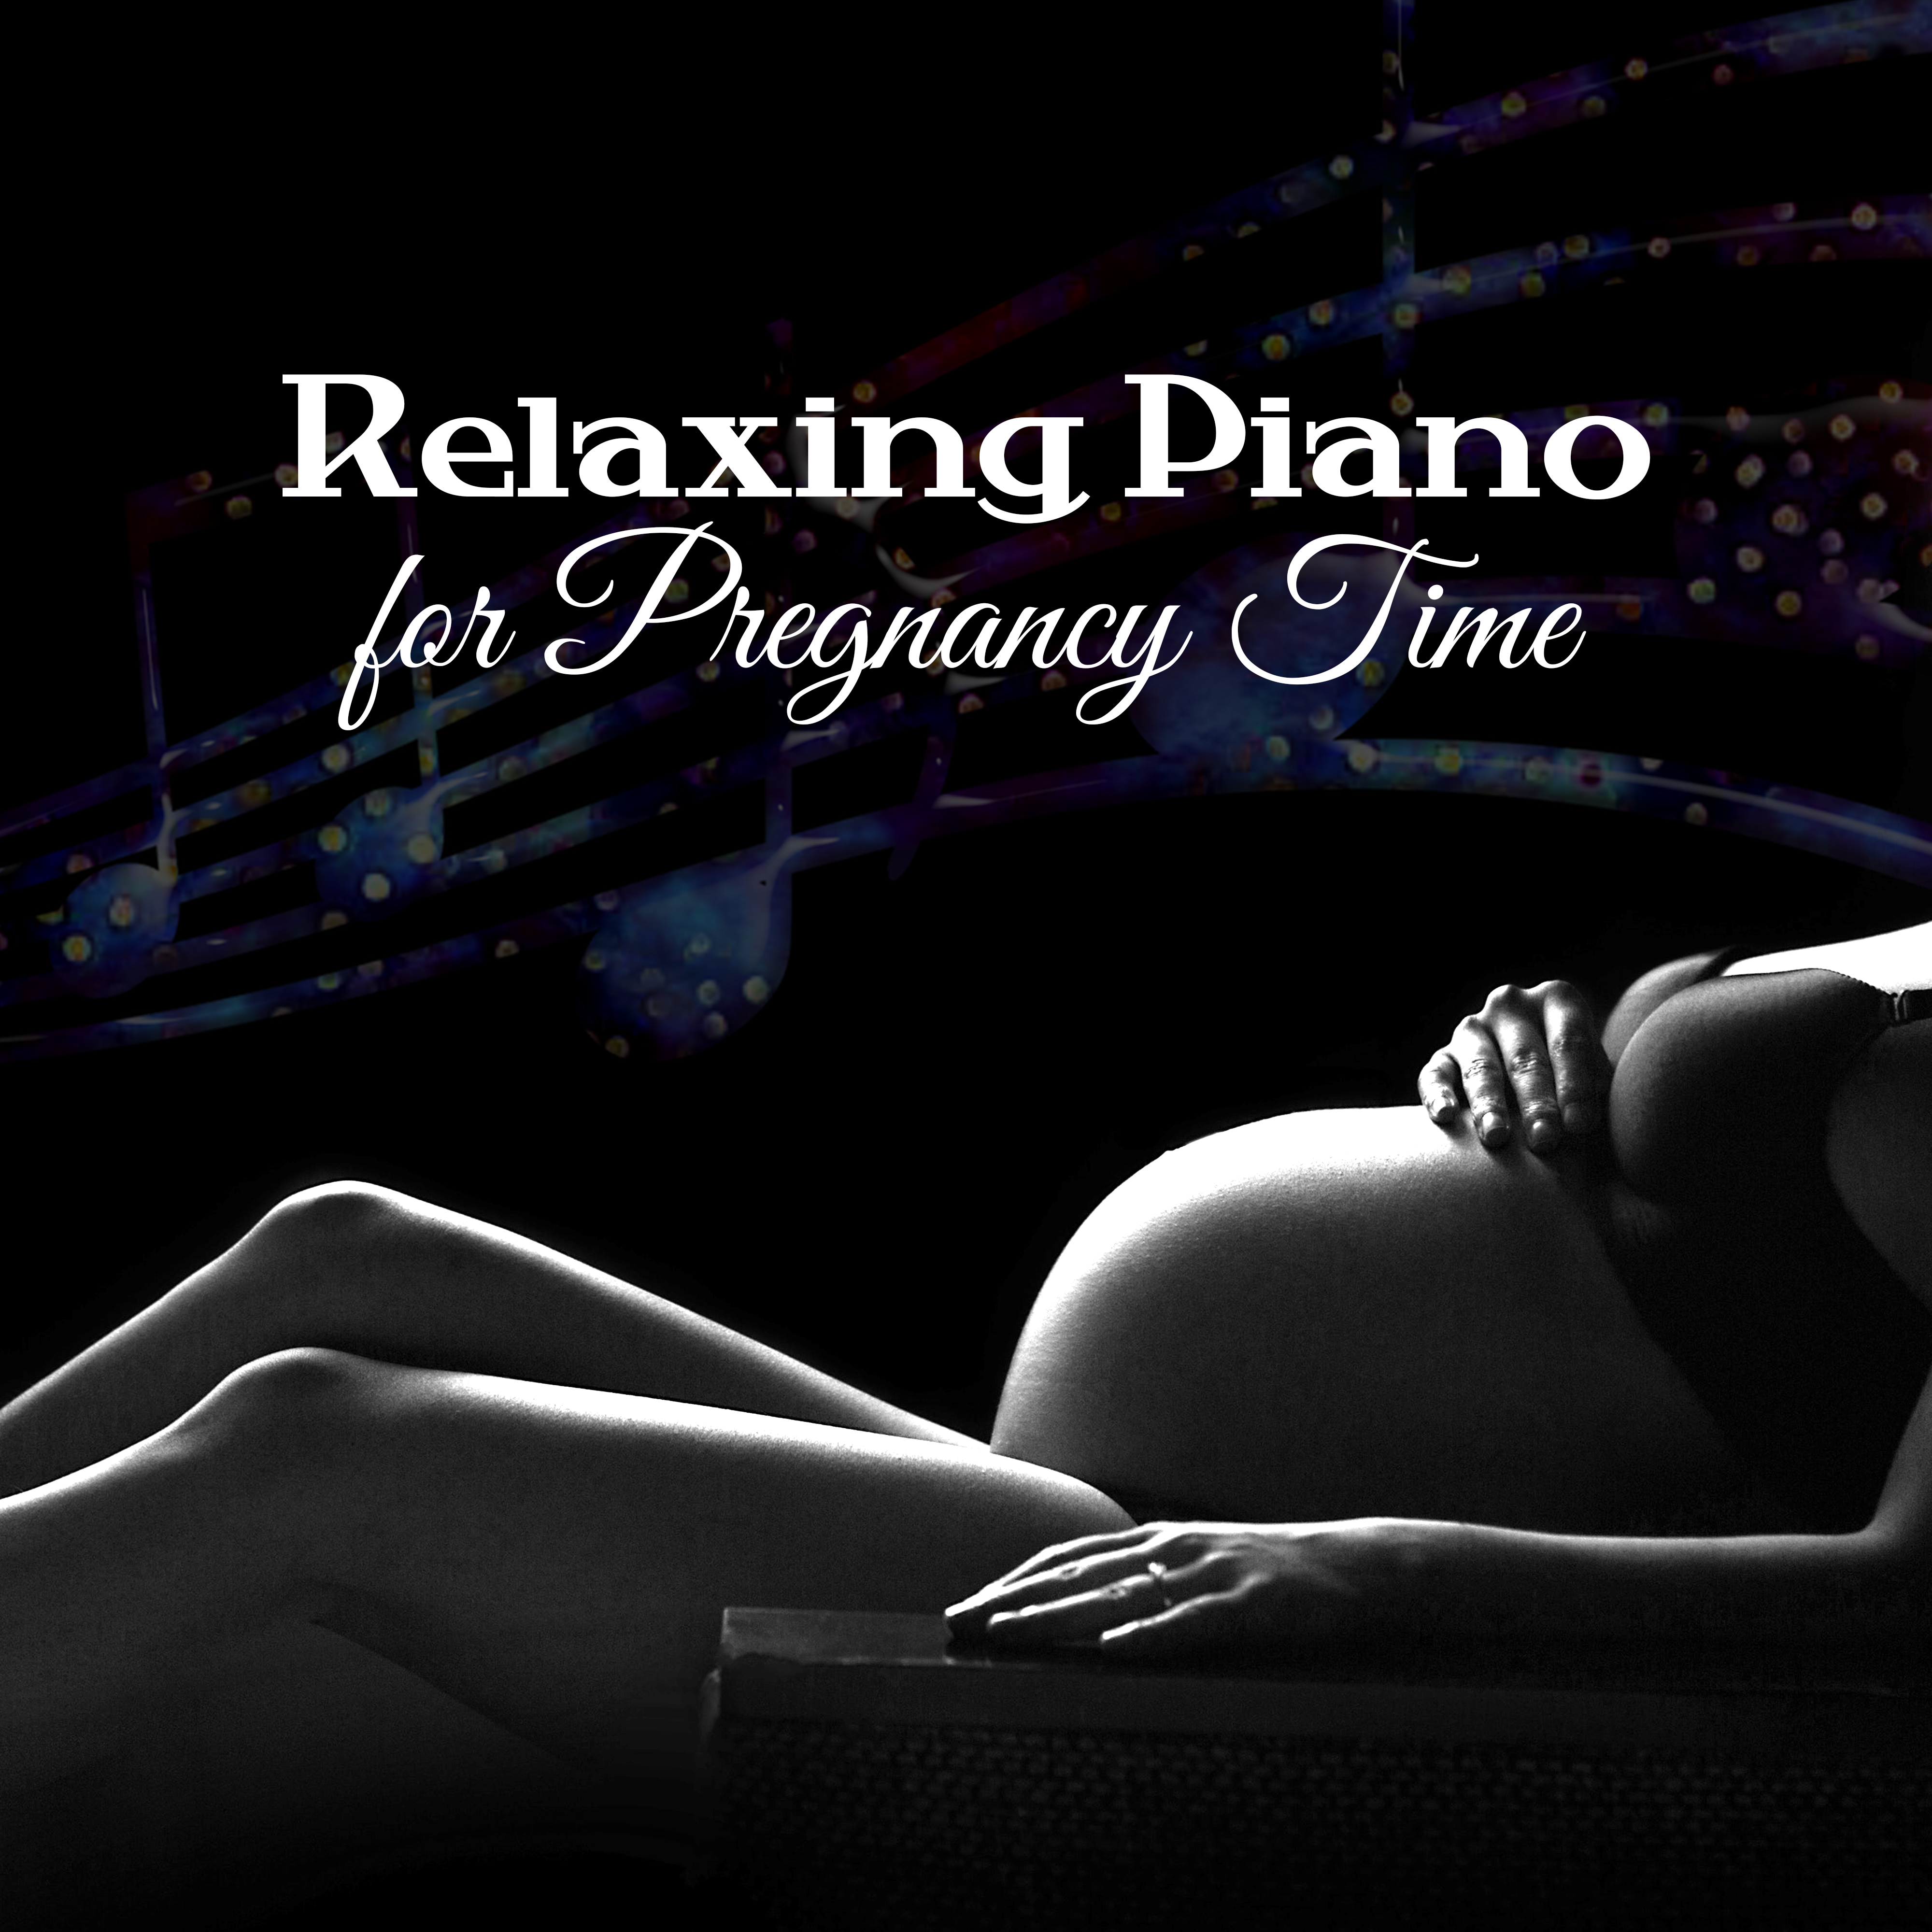 Relaxing Piano for Pregnancy Time – Classical Music, The Best for Pregnant Women to Relax and Health Brain Development Babies